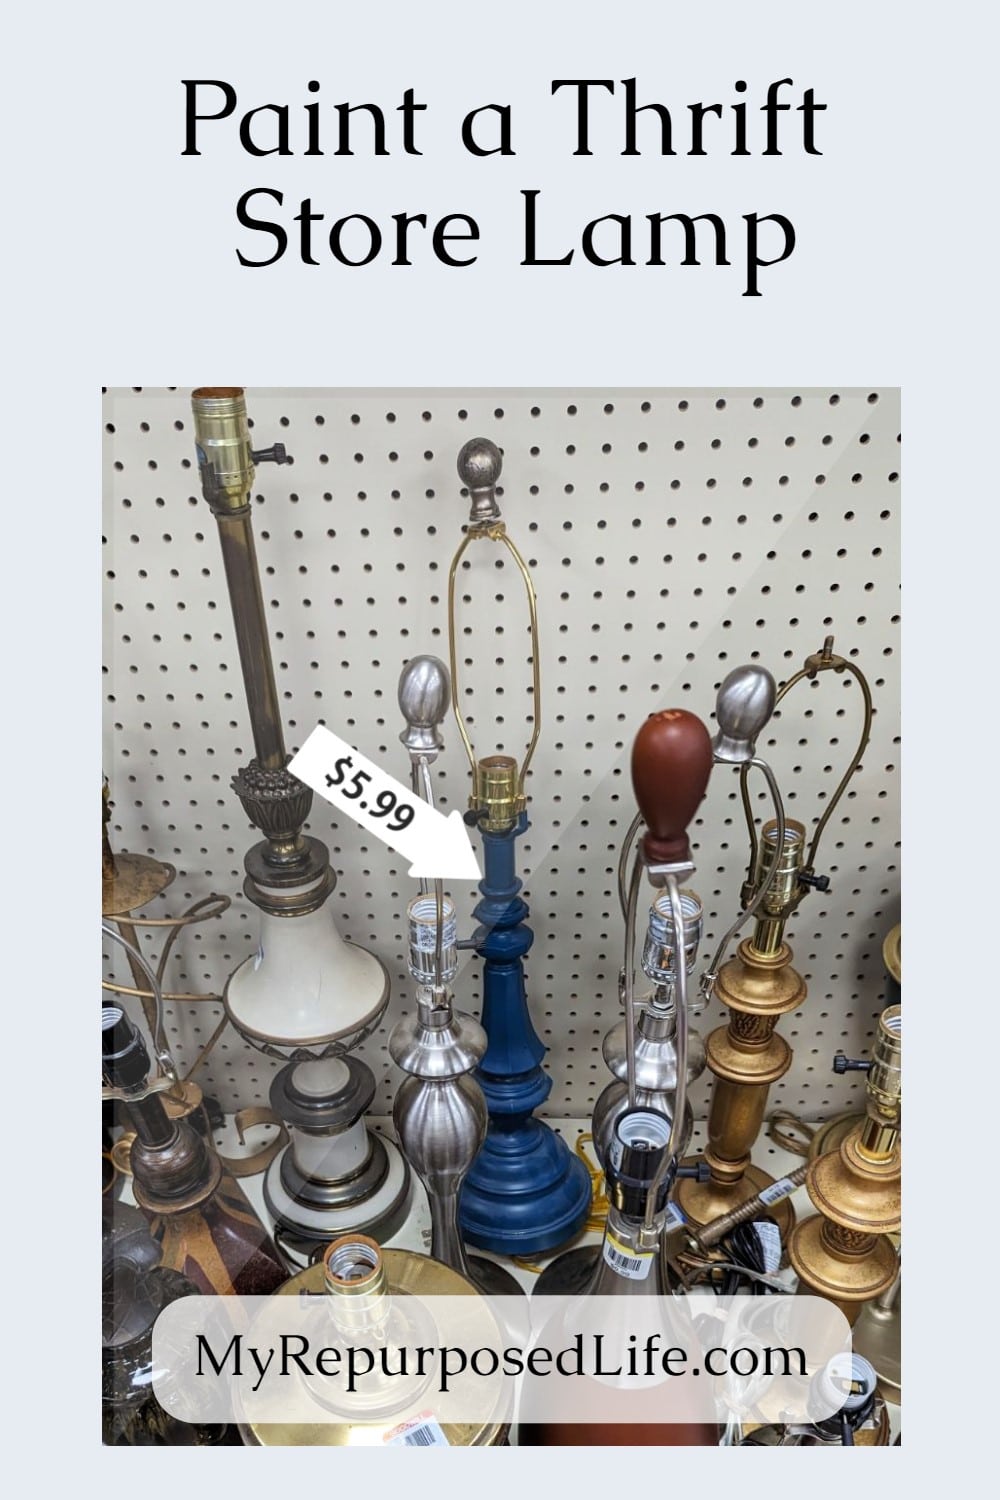 Tips on painting a thrift store lamp. What paint should you use? How many coats of paint. All your questions answered. via @repurposedlife